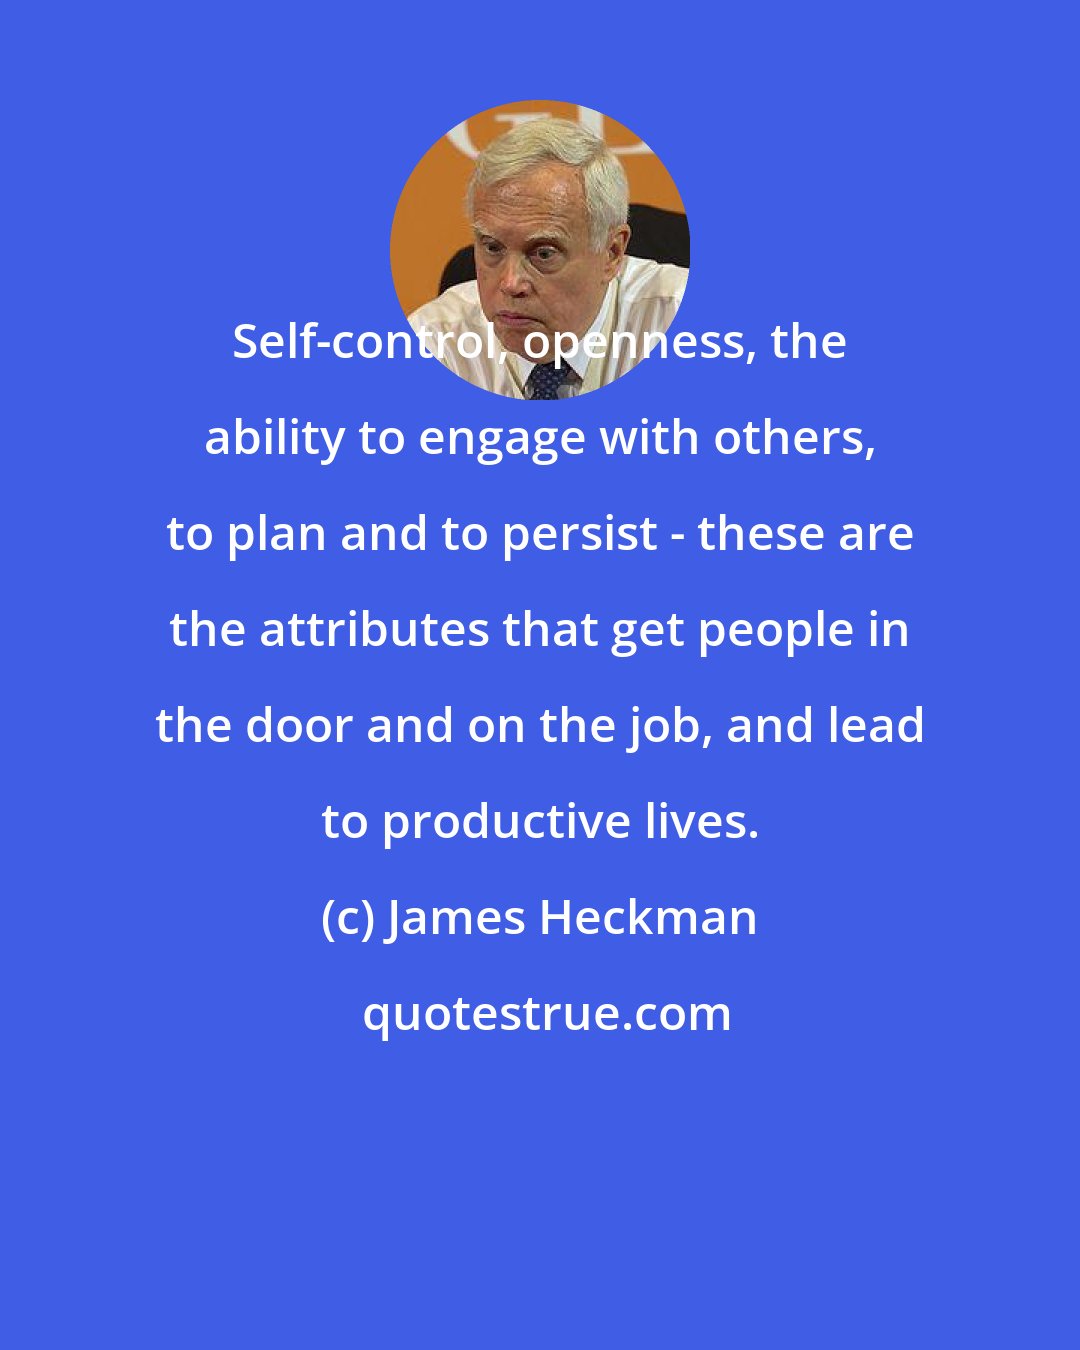 James Heckman: Self-control, openness, the ability to engage with others, to plan and to persist - these are the attributes that get people in the door and on the job, and lead to productive lives.